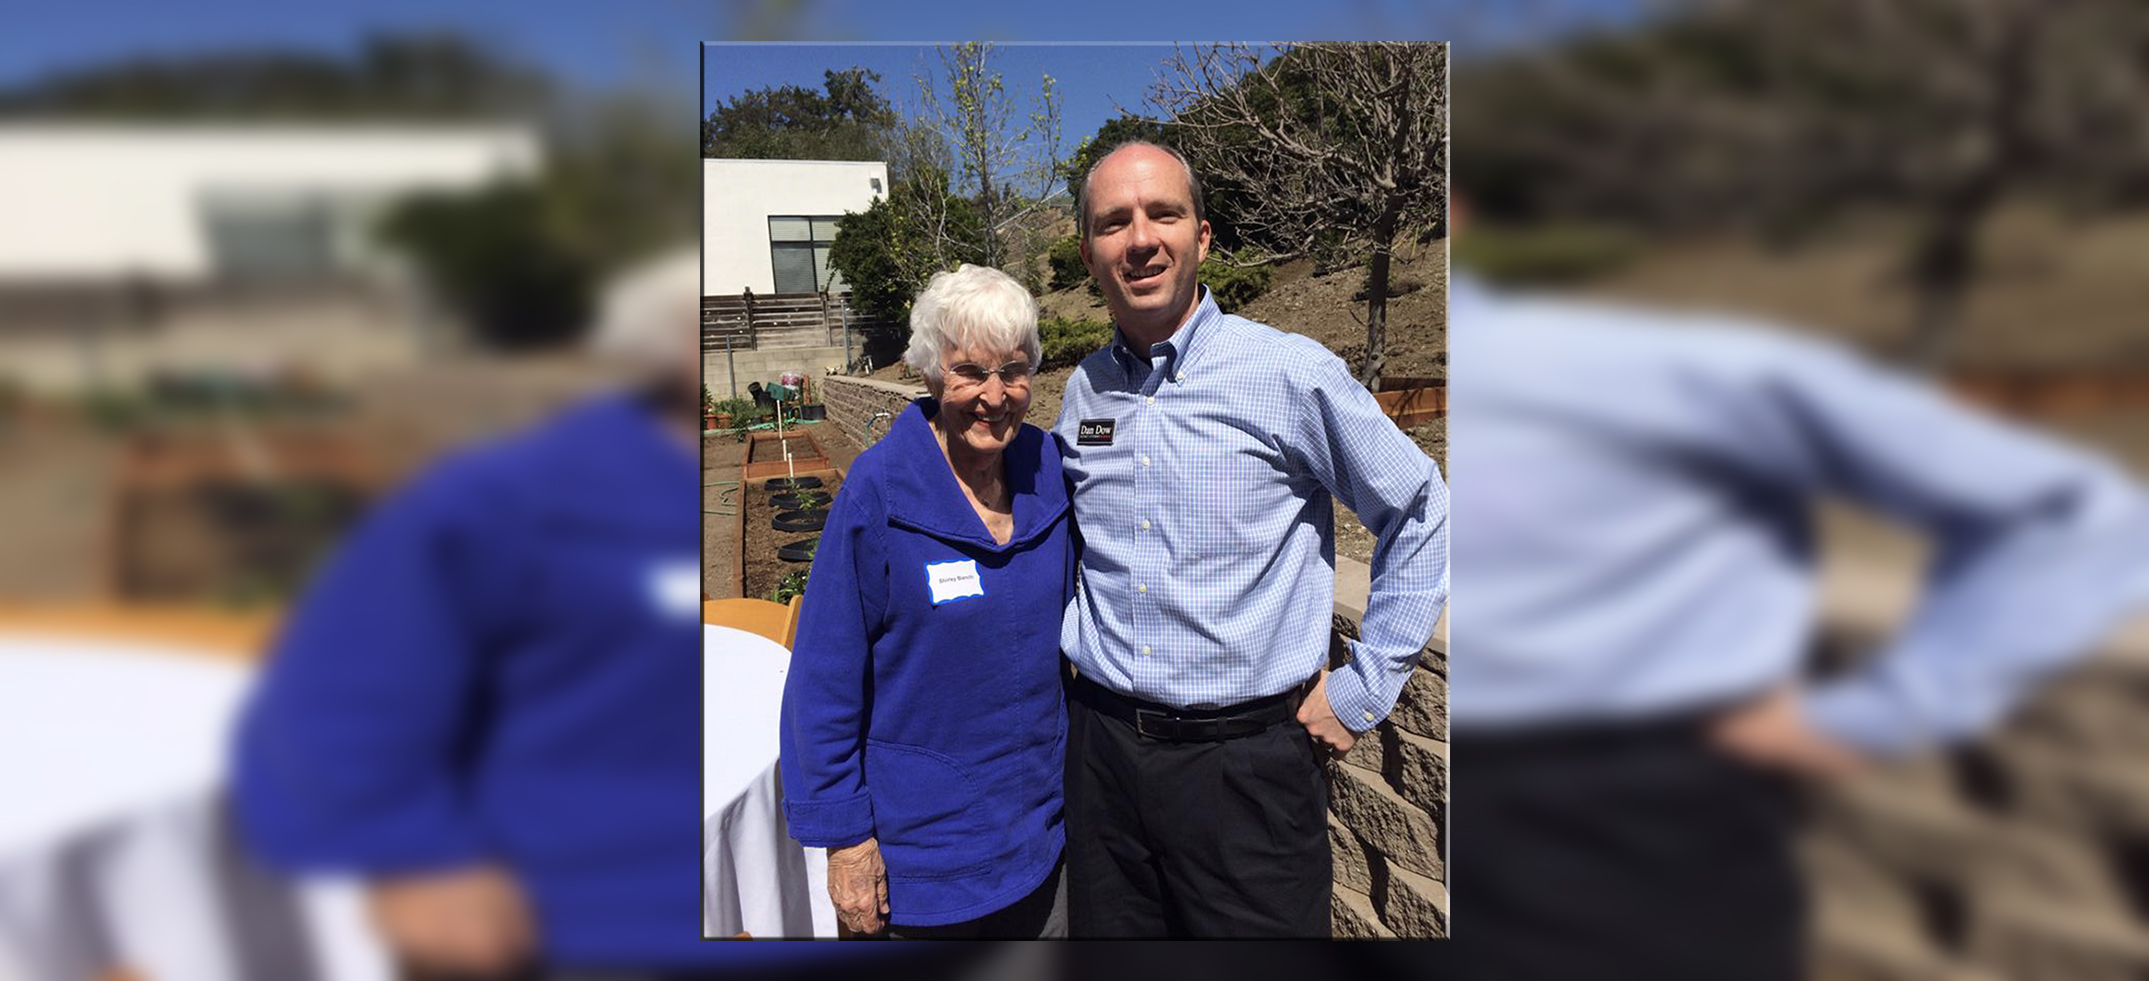 Retired Supervisor Shirley Bianchi with then Deputy District Attorney Dan Dow, March 22, 2014 (San Luis Obispo). 